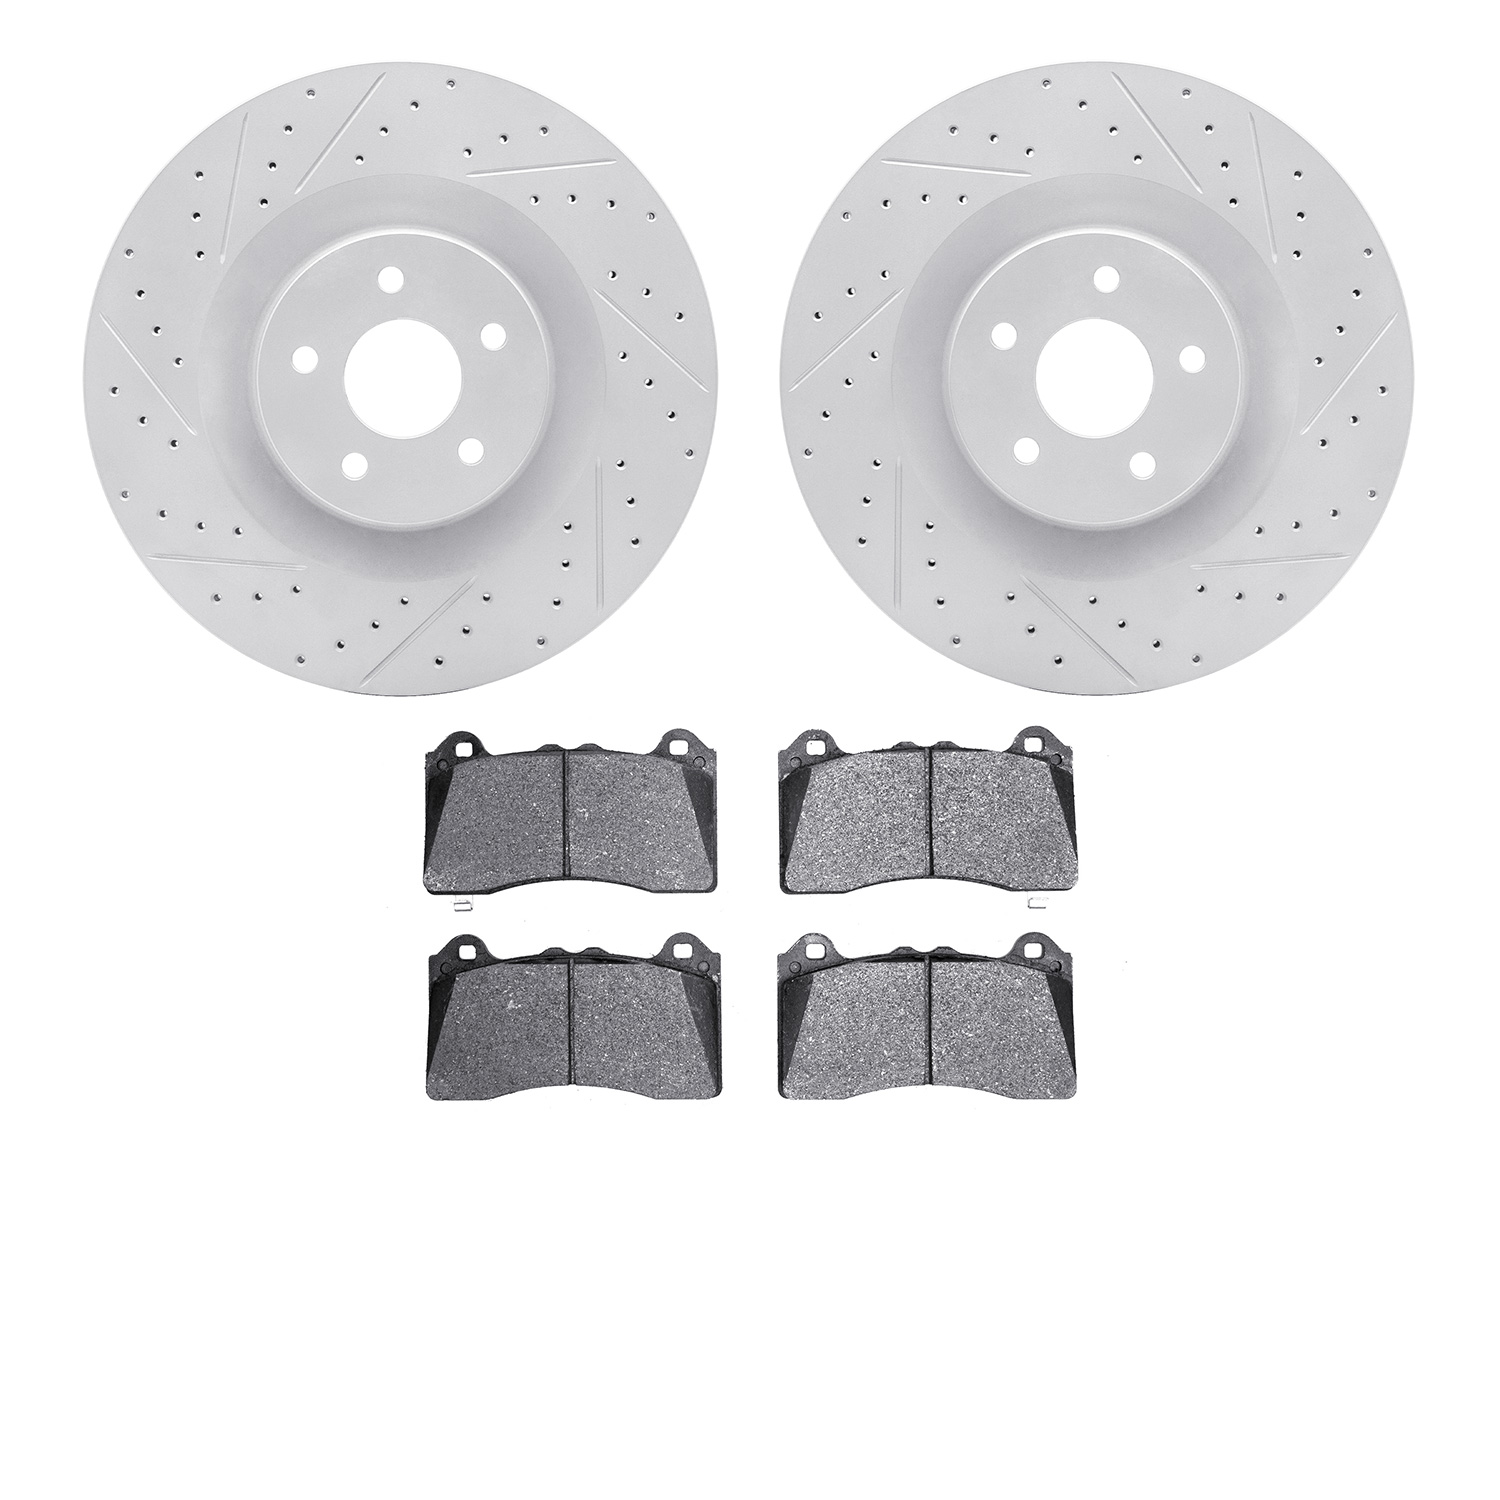 2502-54242 Geoperformance Drilled/Slotted Rotors w/5000 Advanced Brake Pads Kit, 2016-2018 Ford/Lincoln/Mercury/Mazda, Position: